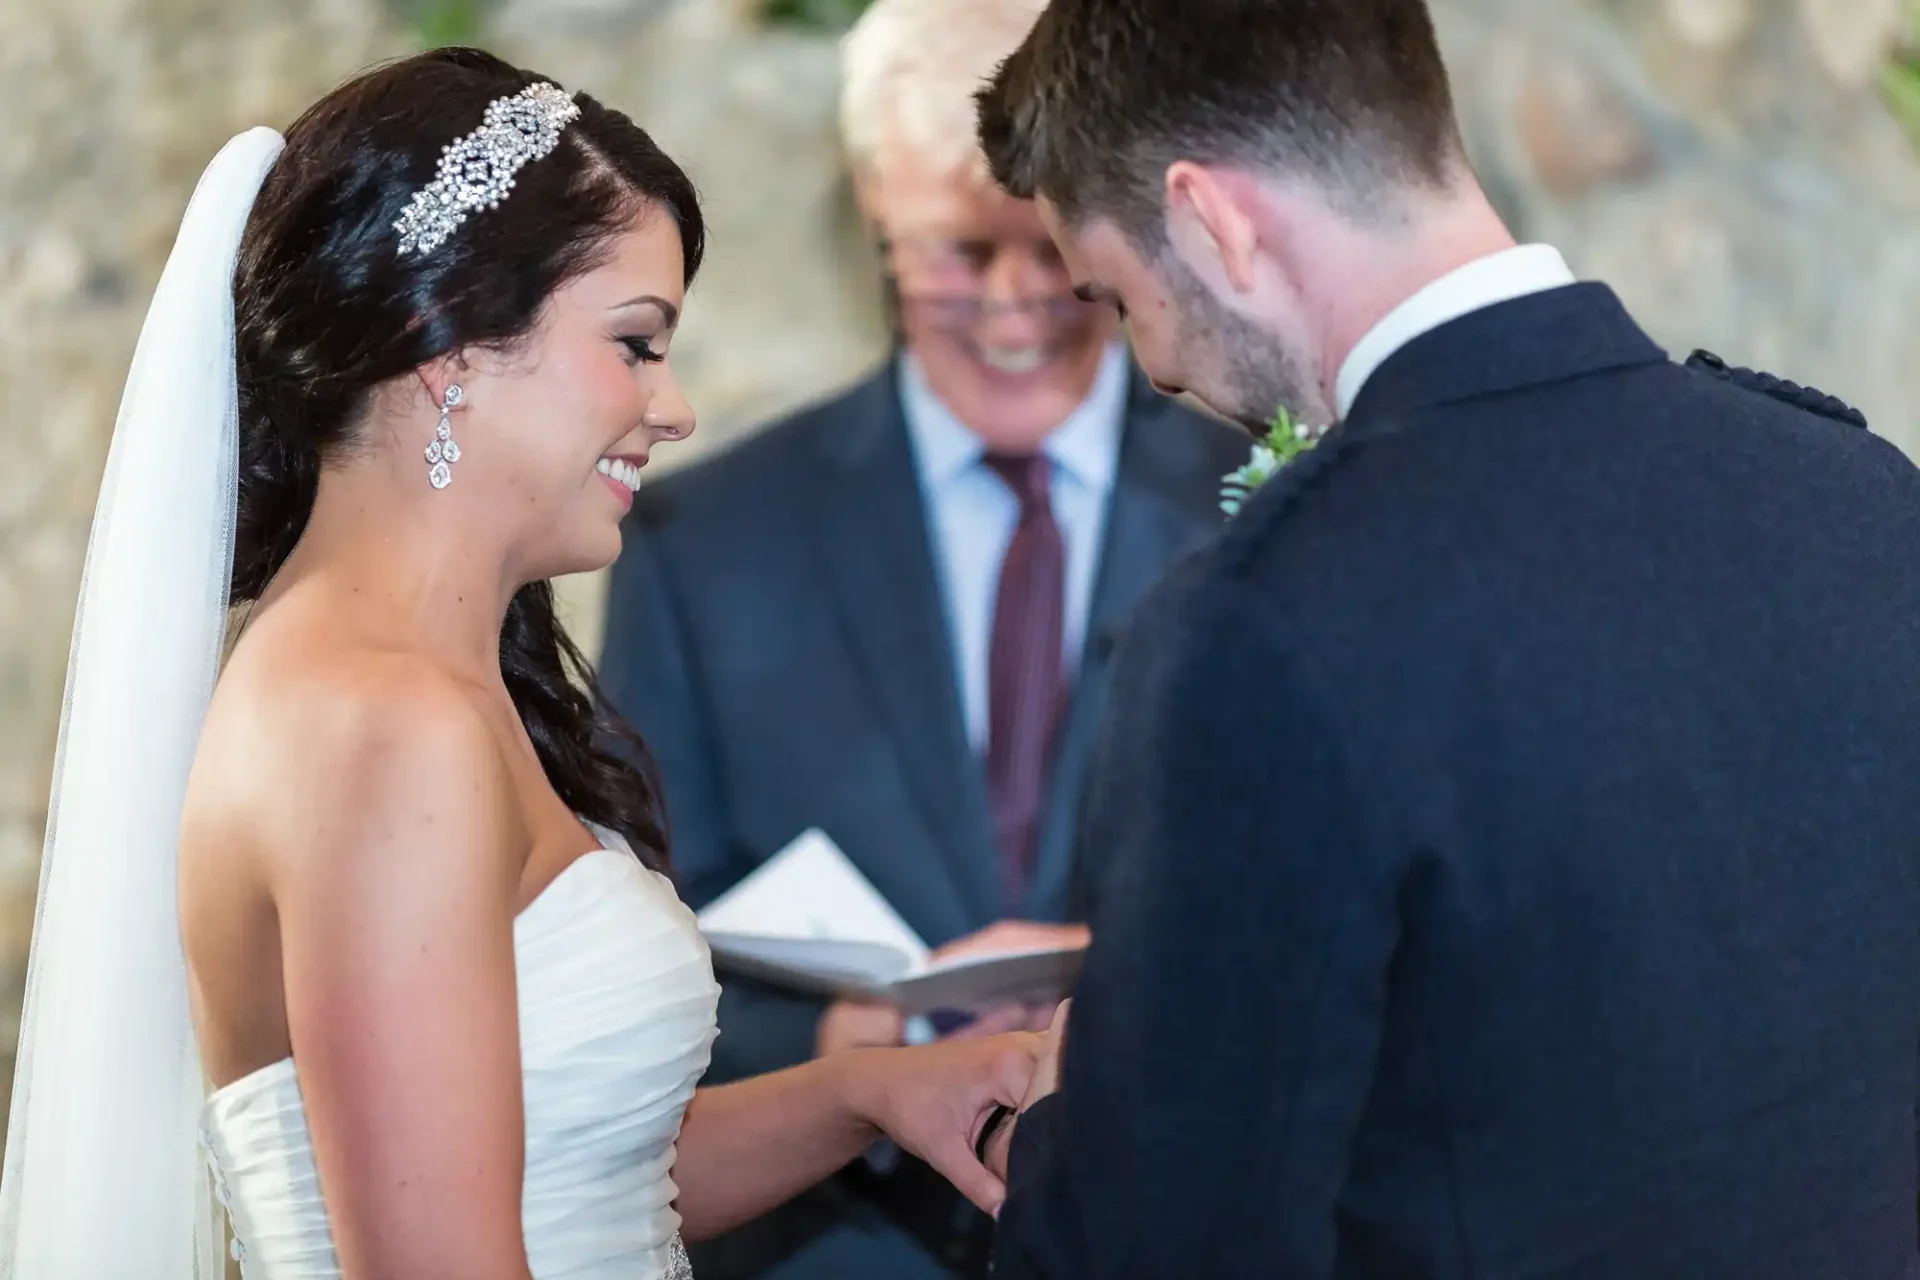 A bride and groom exchanging vows, smiling at each other, with an officiant looking on in the background.